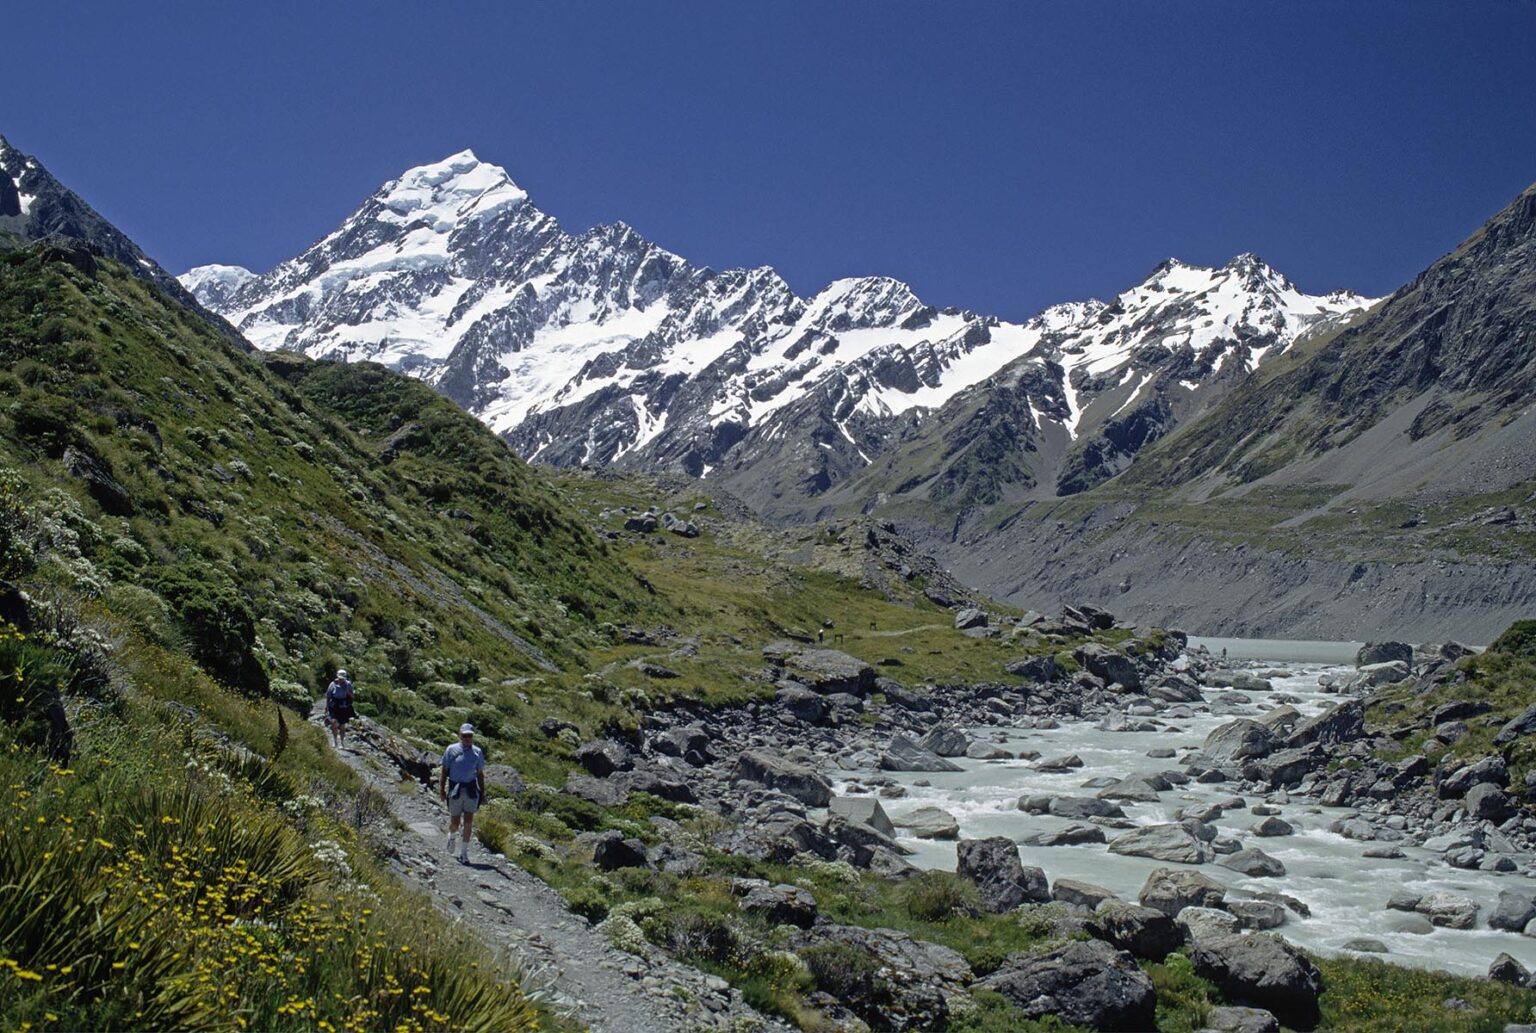 MT COOK, New Zealand's highest peak at 12,246 feet, rises majestically above the HOOKER VALLEY - MT COOK NATIONAL PARK, SOUTH ISLAND NEW ZEALAND